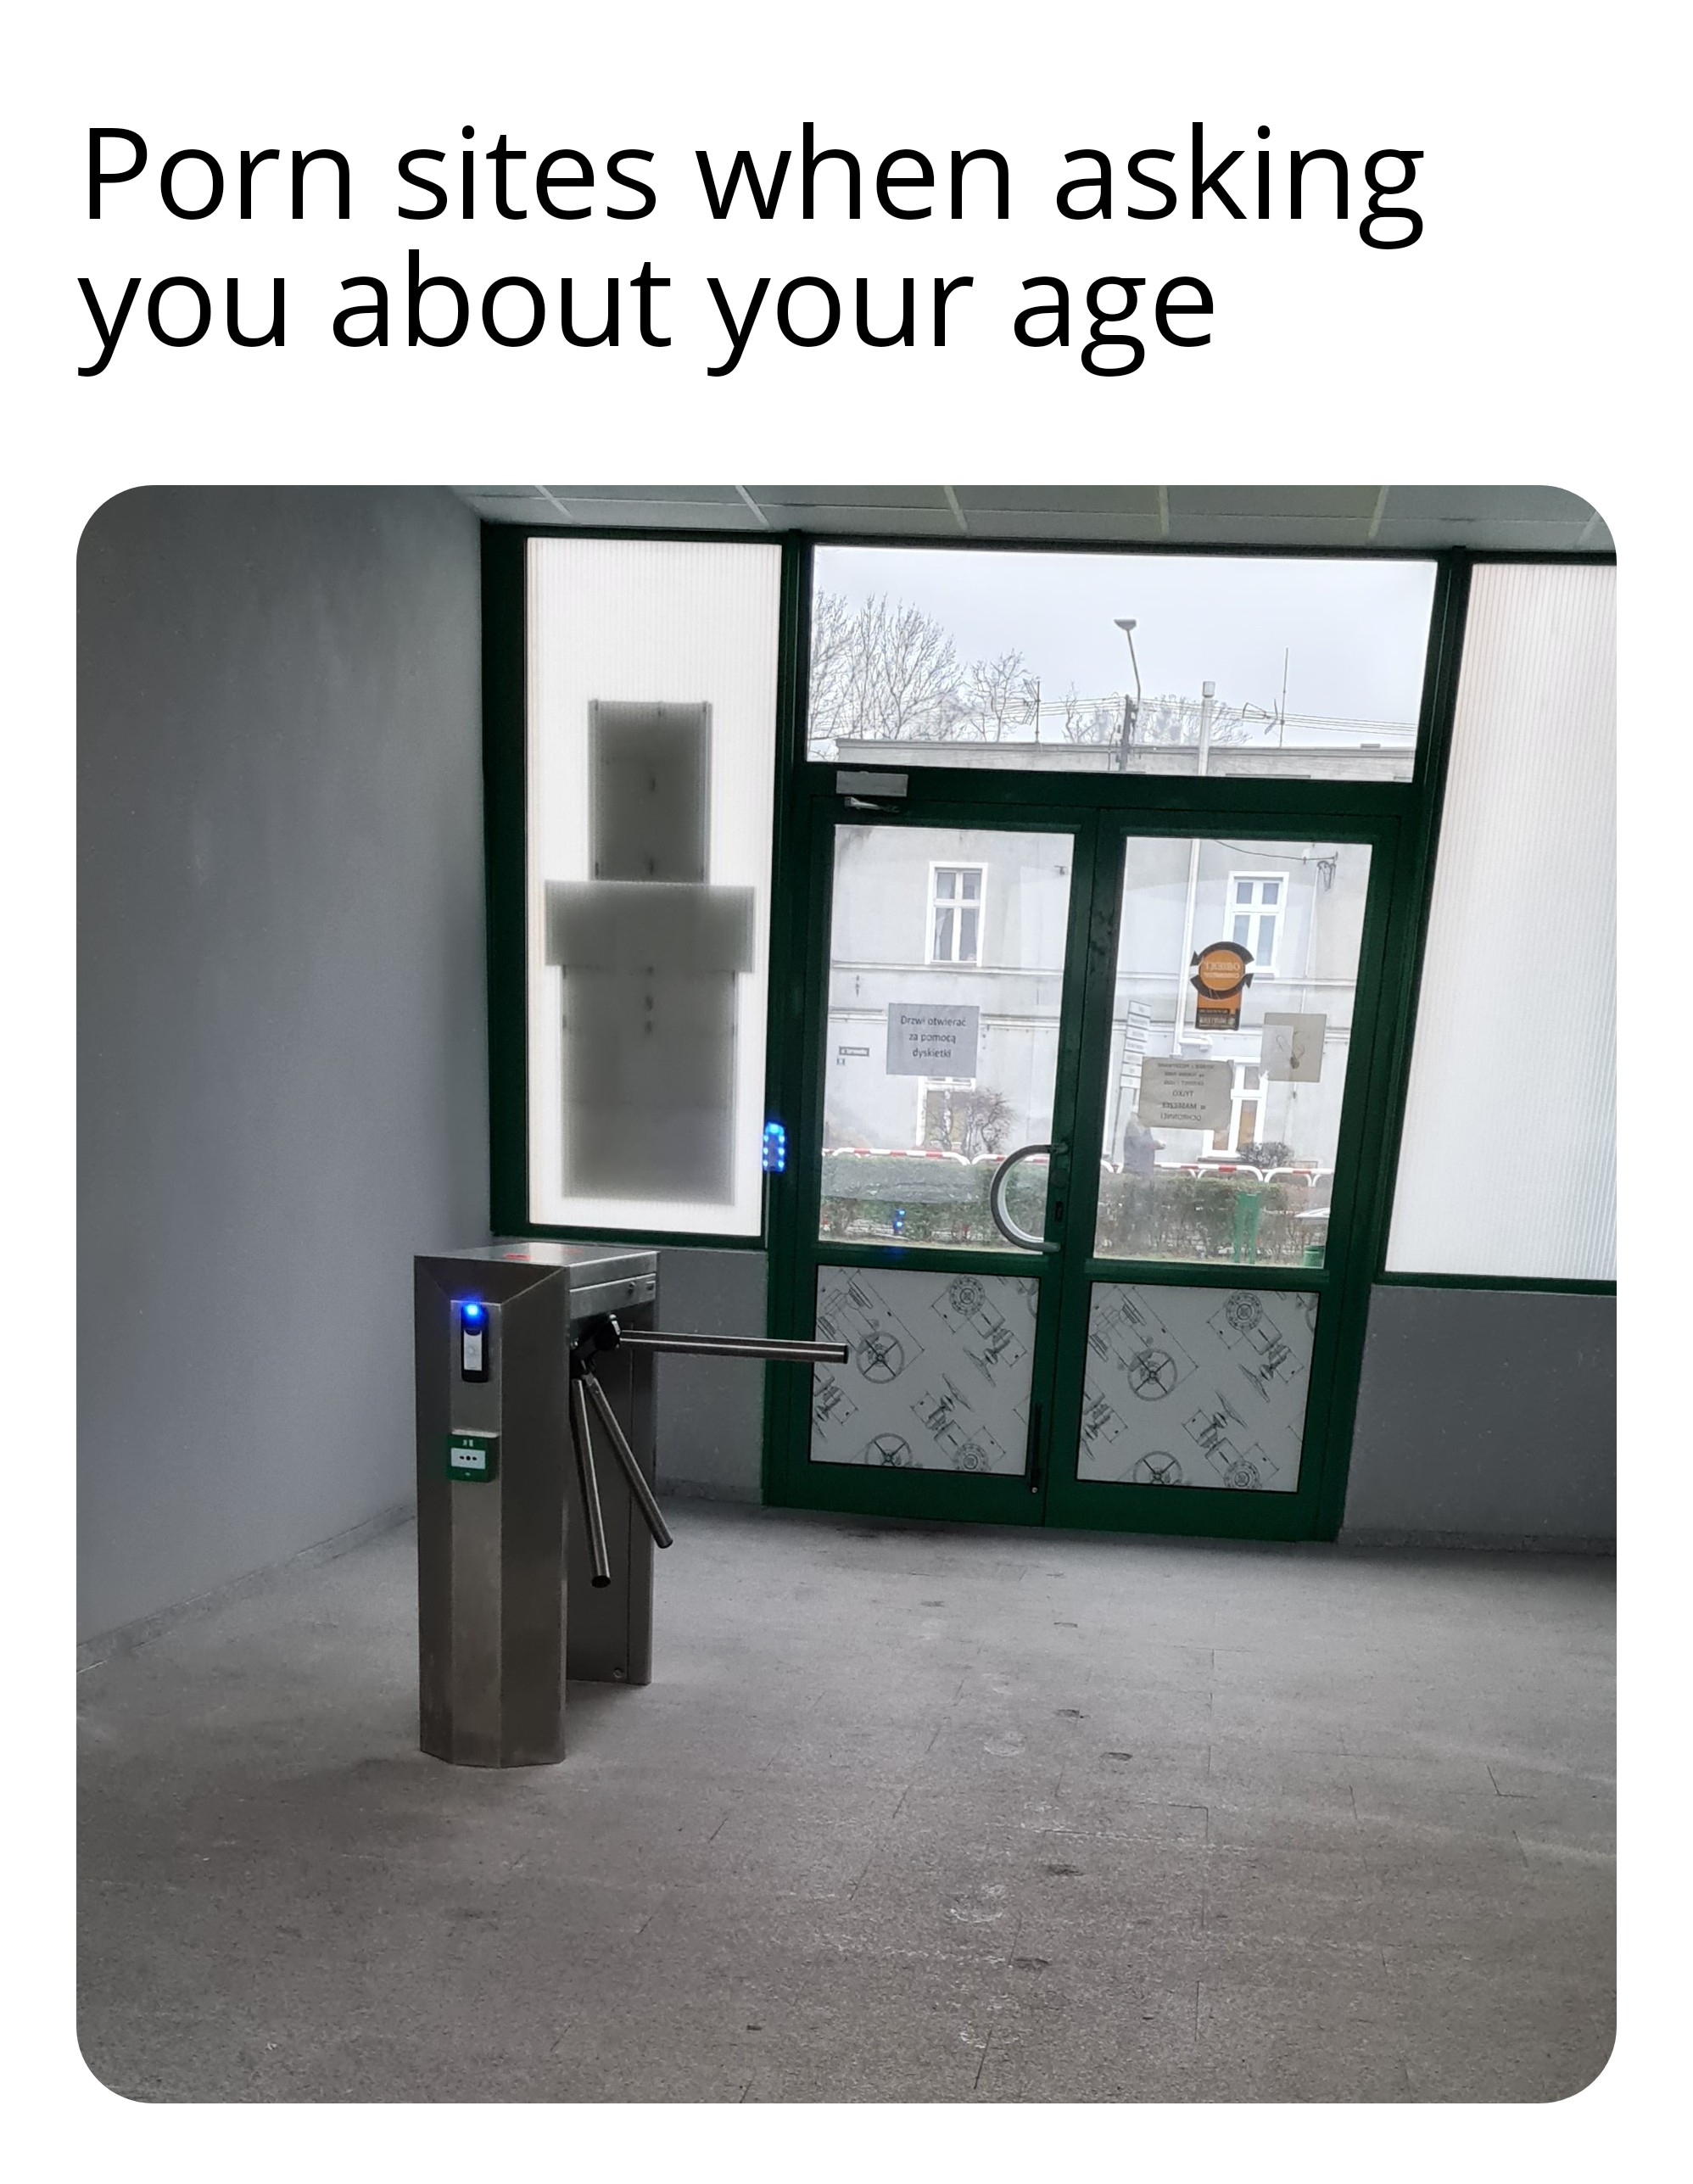 glass - Porn sites when asking you about your age